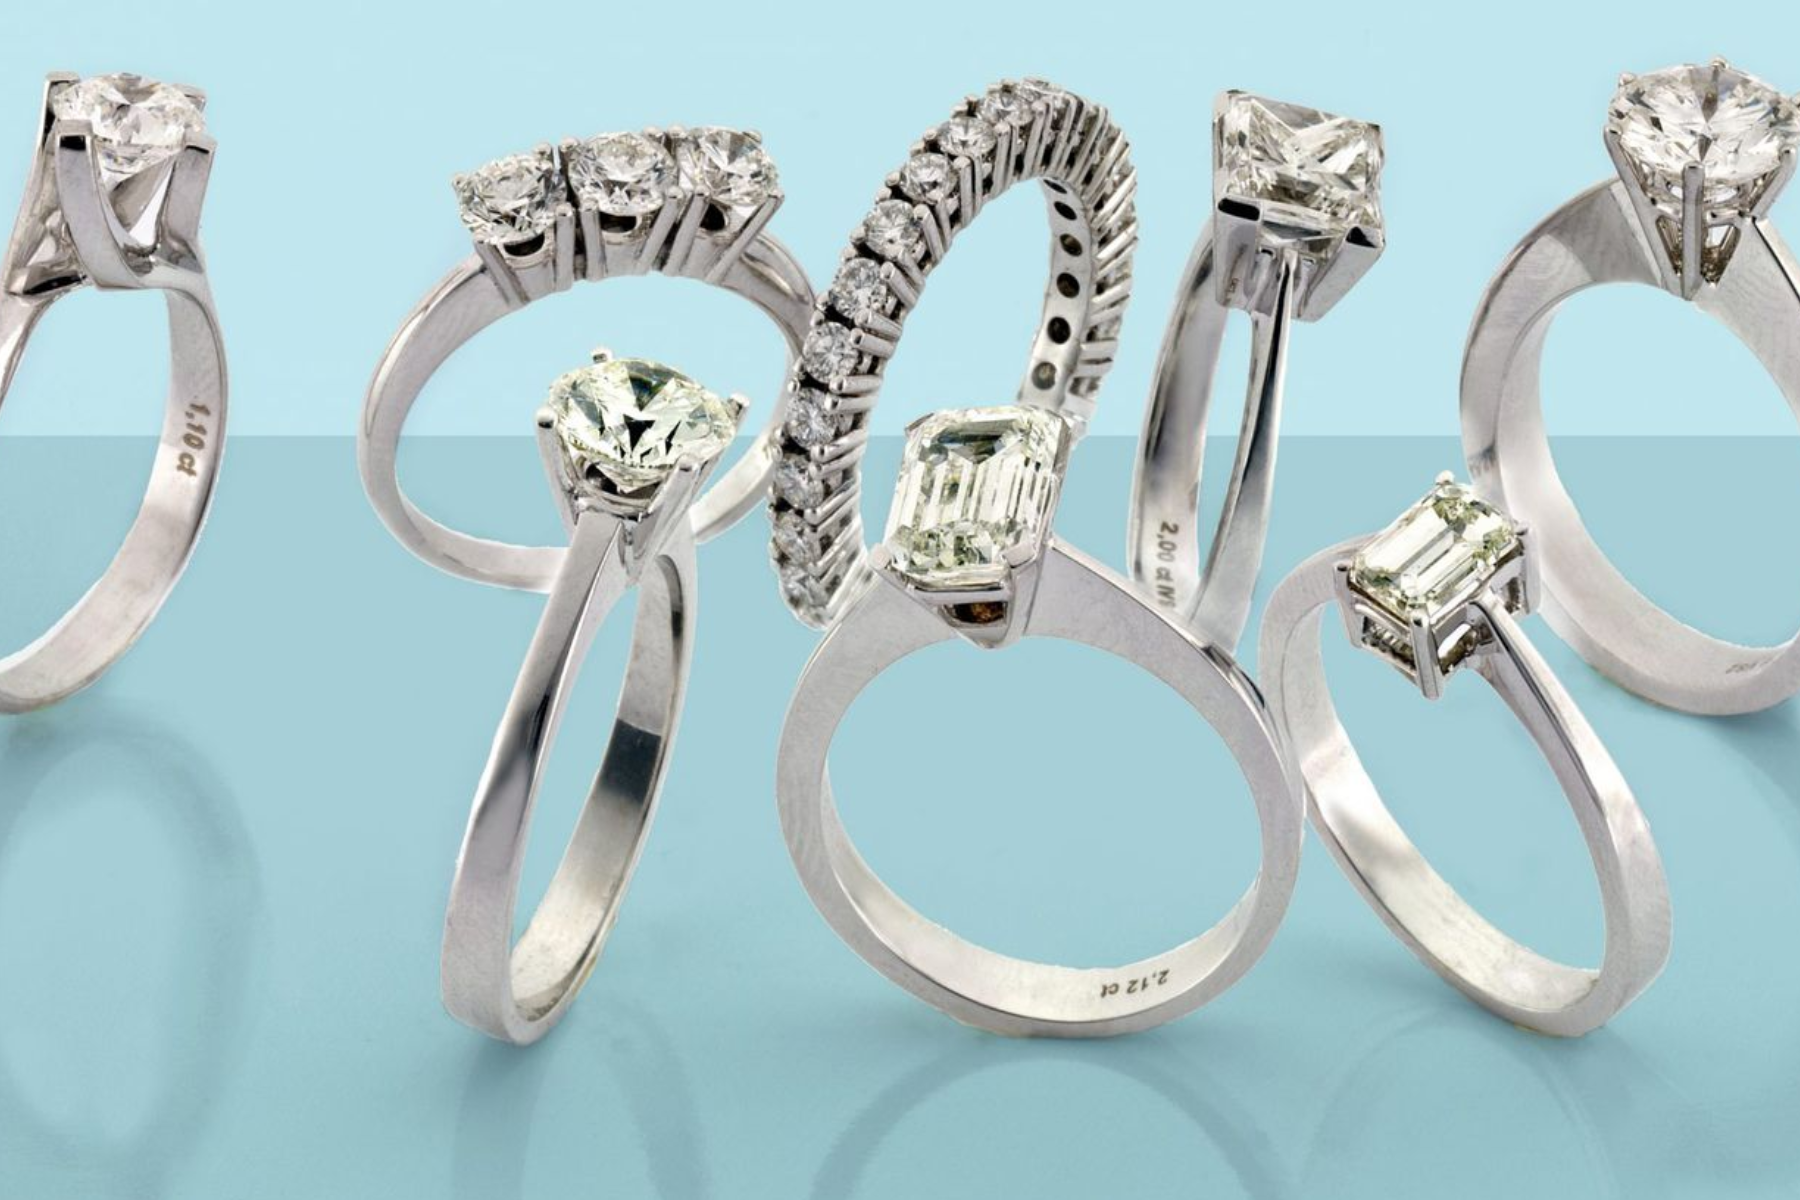 A photo of eight rings with various diamond cuts